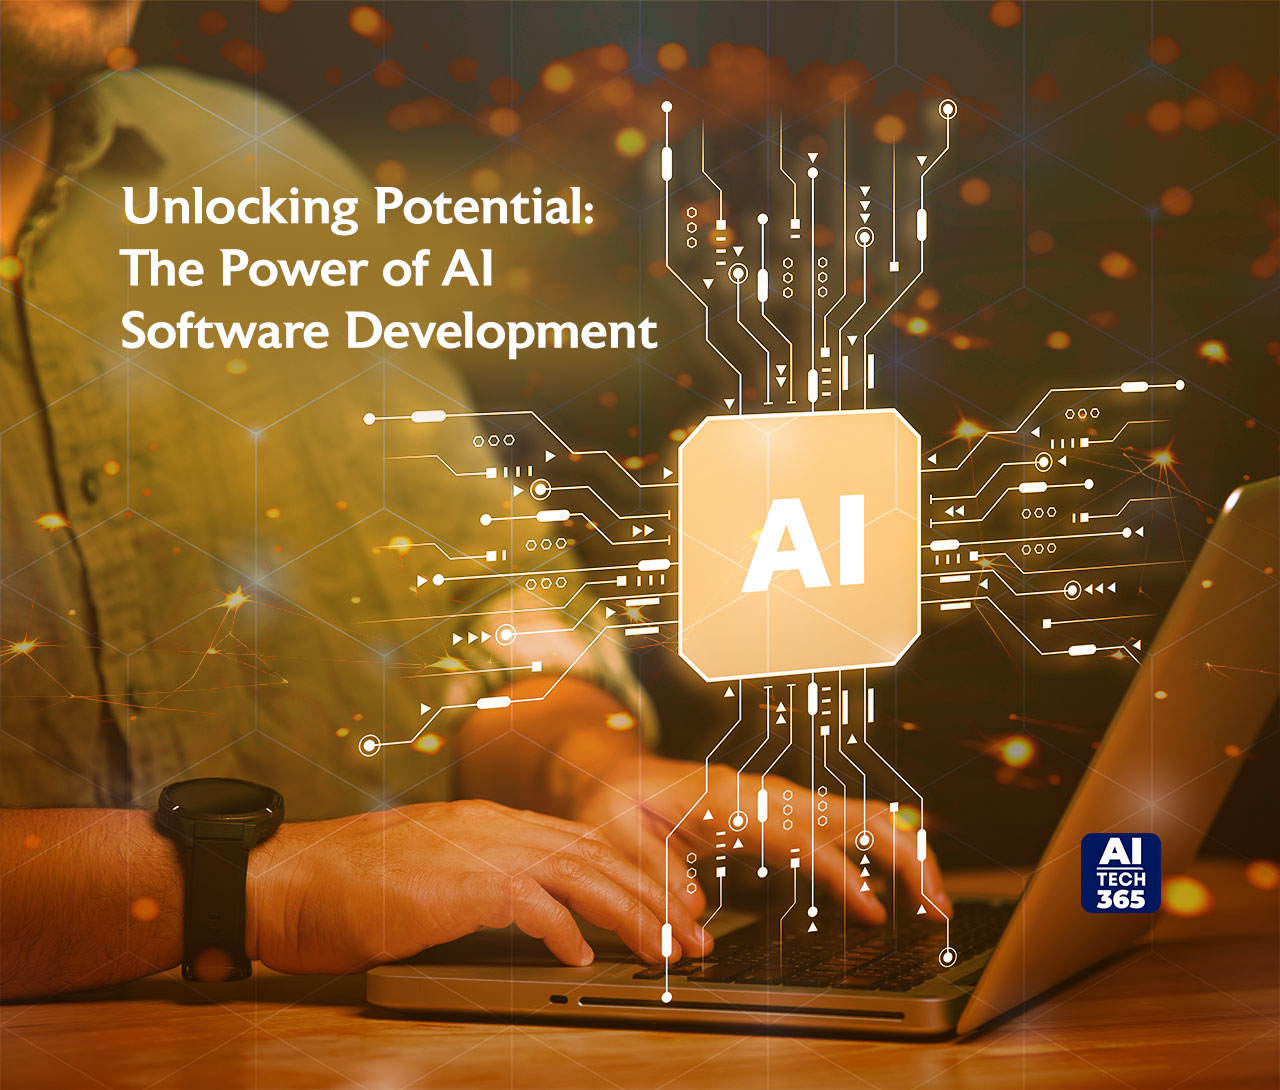 Unlocking Potential: The Power of AI Software Development